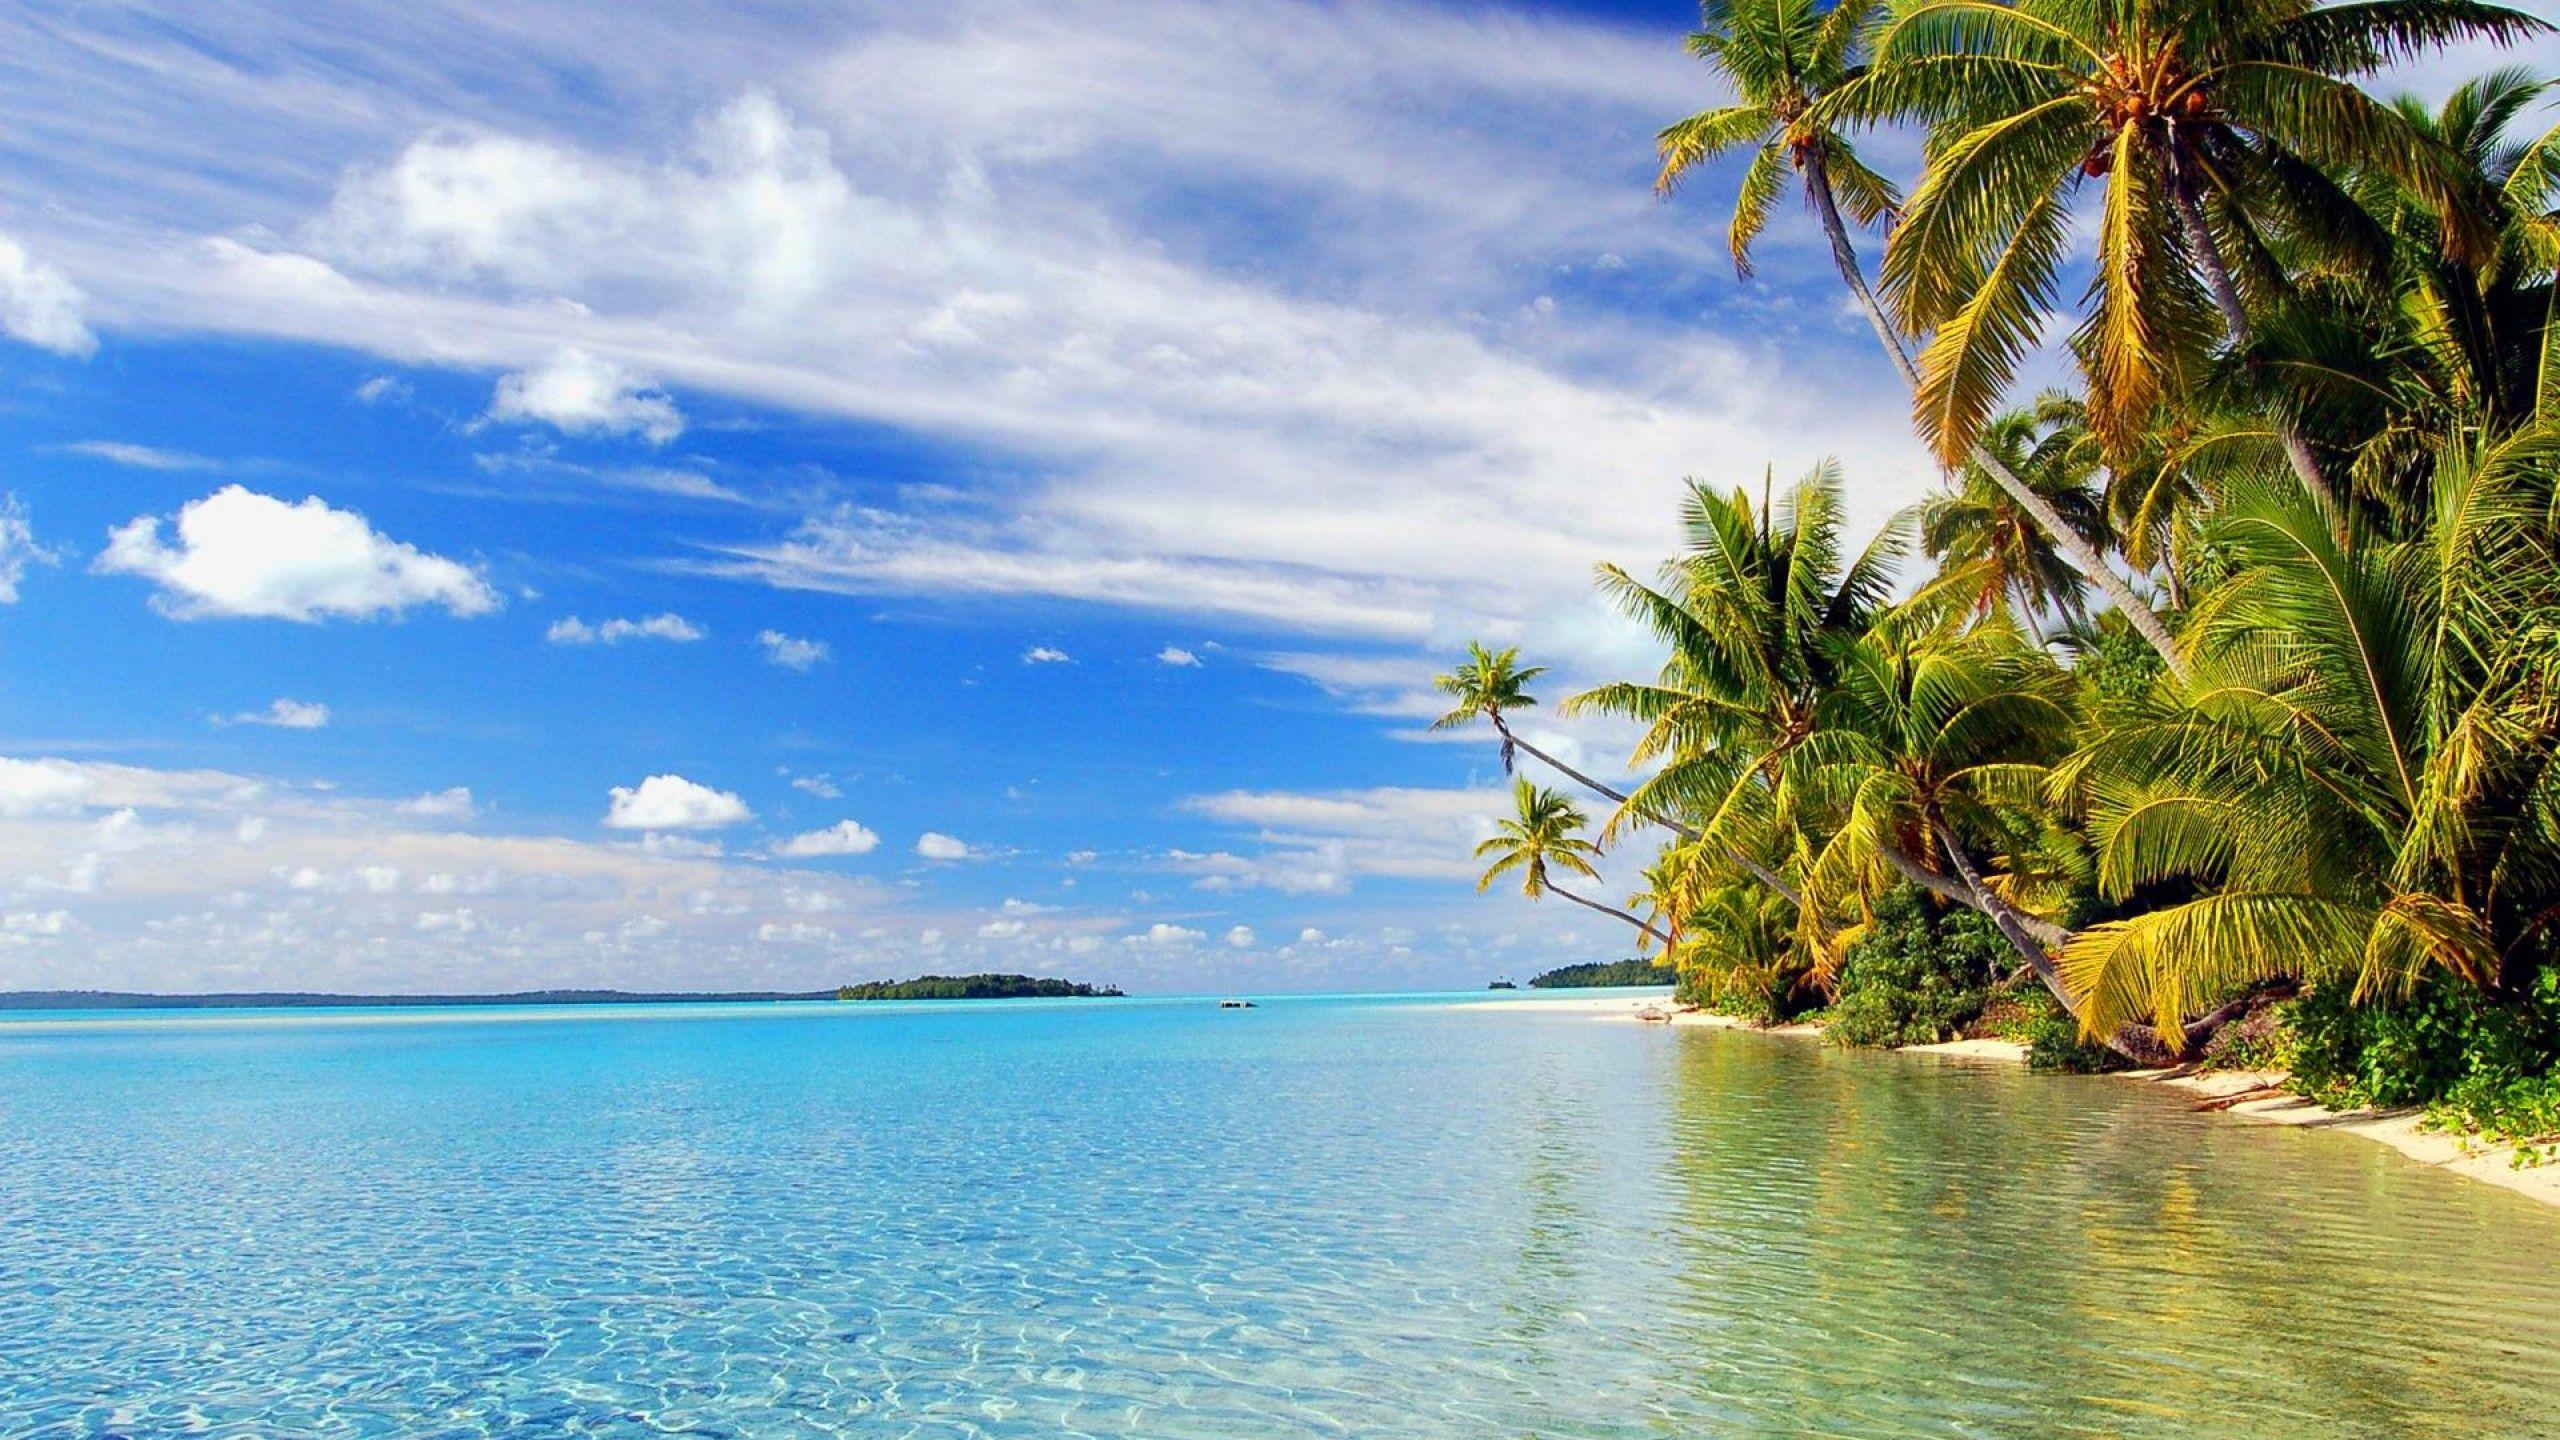 Tropical Beach Landscape Wallpapers - Top Free Tropical Beach Landscape Backgrounds